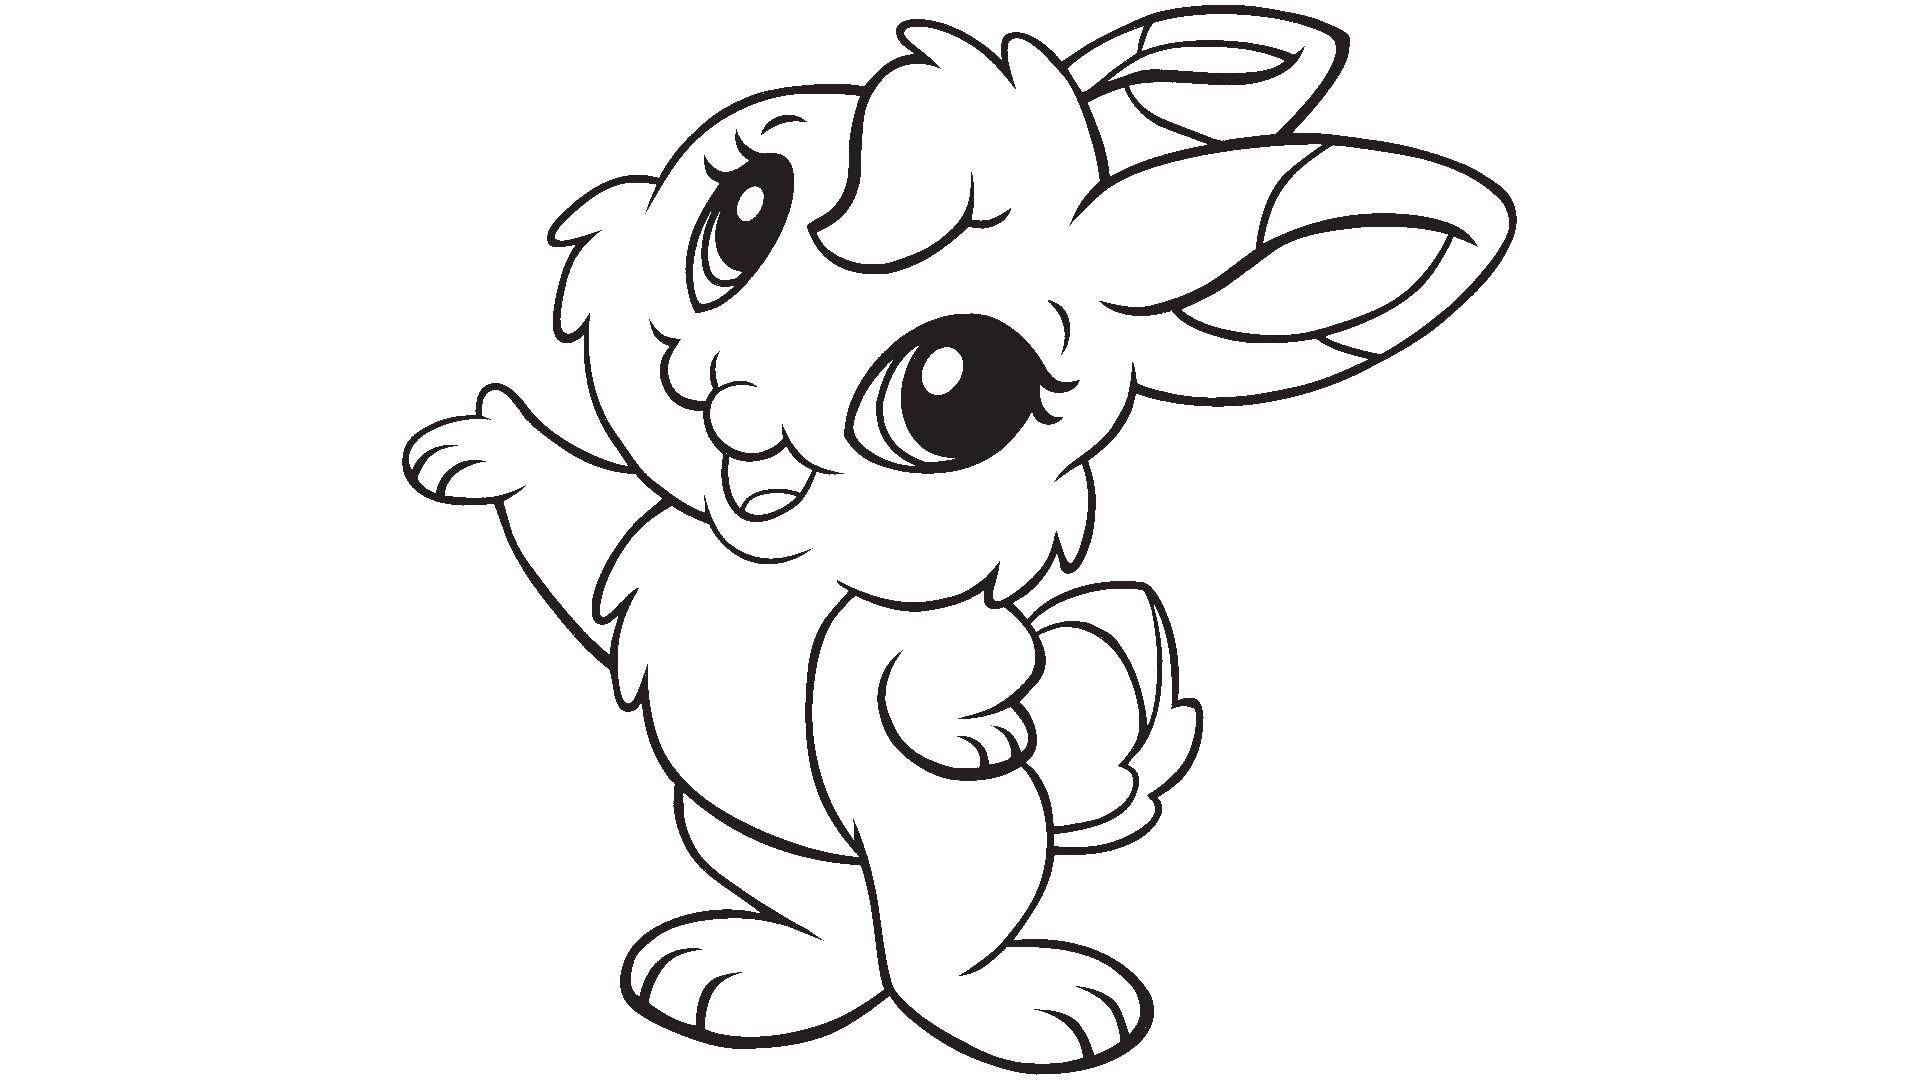 Coloring Bunny. Category the rabbit. Tags:  rabbit, hare.